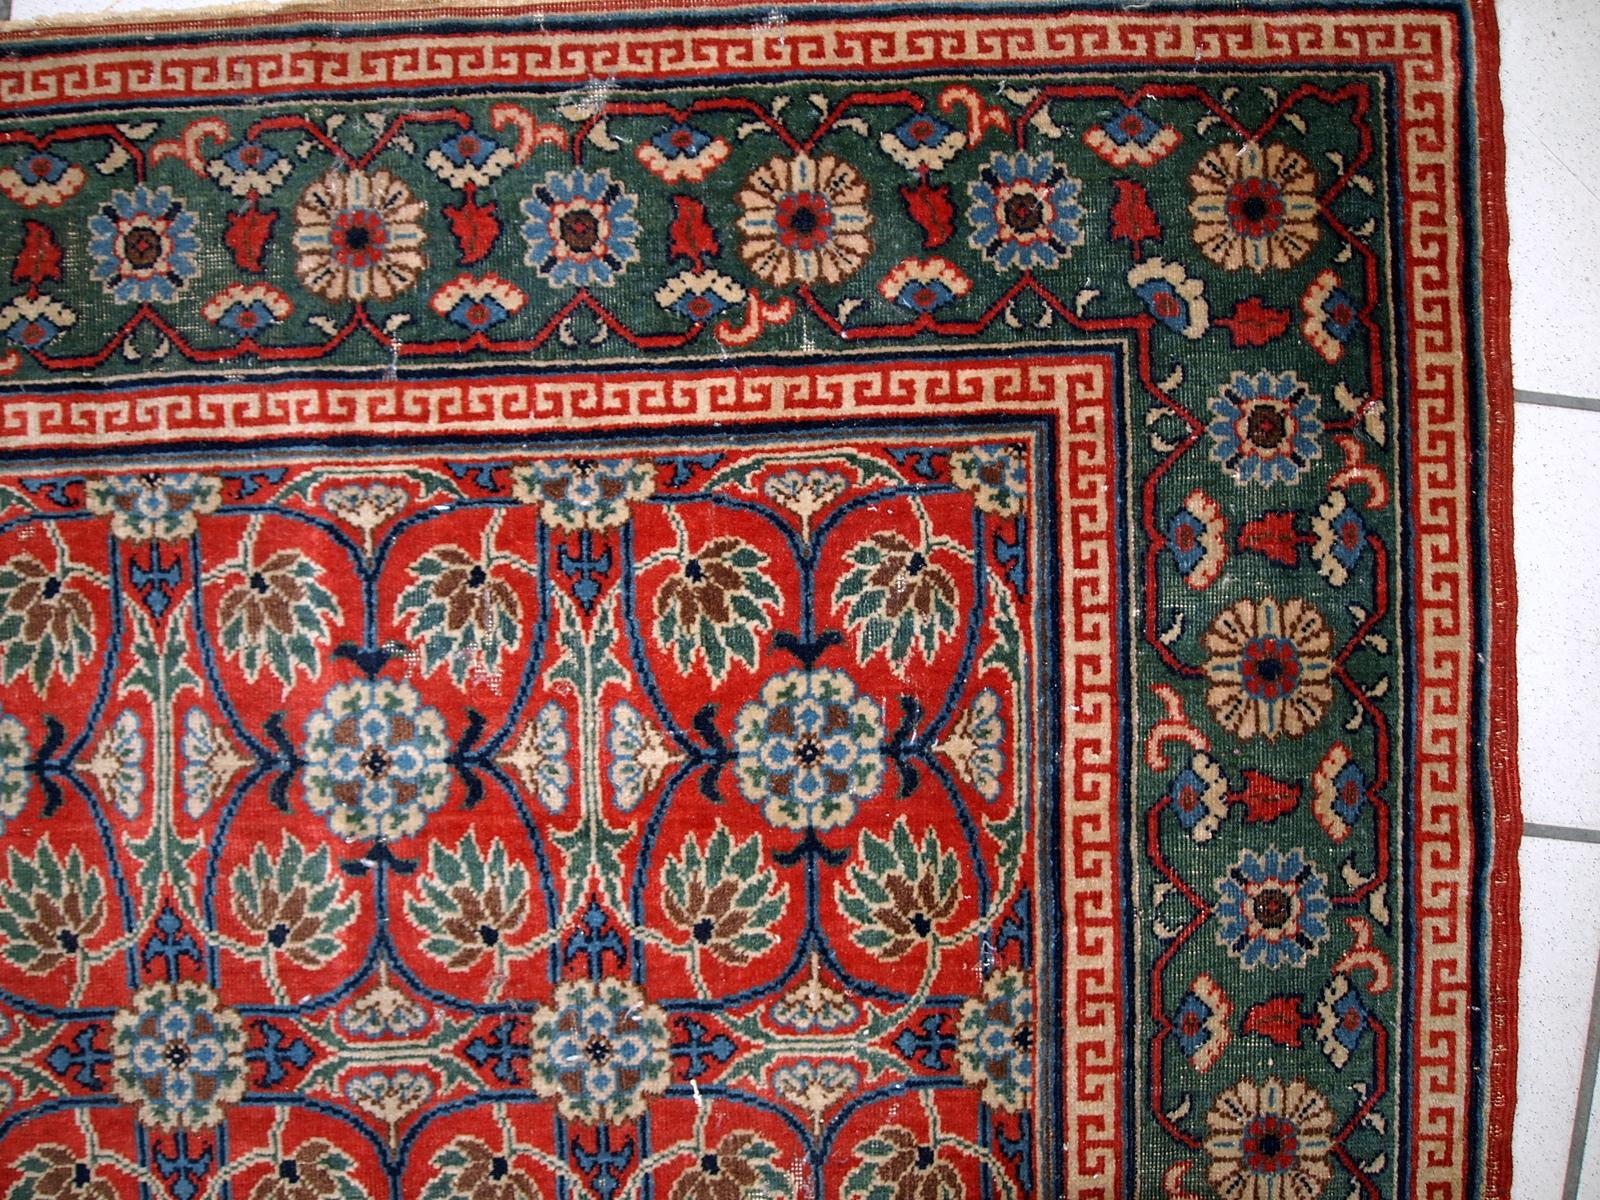 Handmade antique East Turkestan distressed rug with repeating pattern. It is in red and green shades, made in the beginning of 20th century.

-condition: distressed,

-circa: 1900s,

-size: 3.5' x 5.1' ( 107cm x 156cm ),

-material: